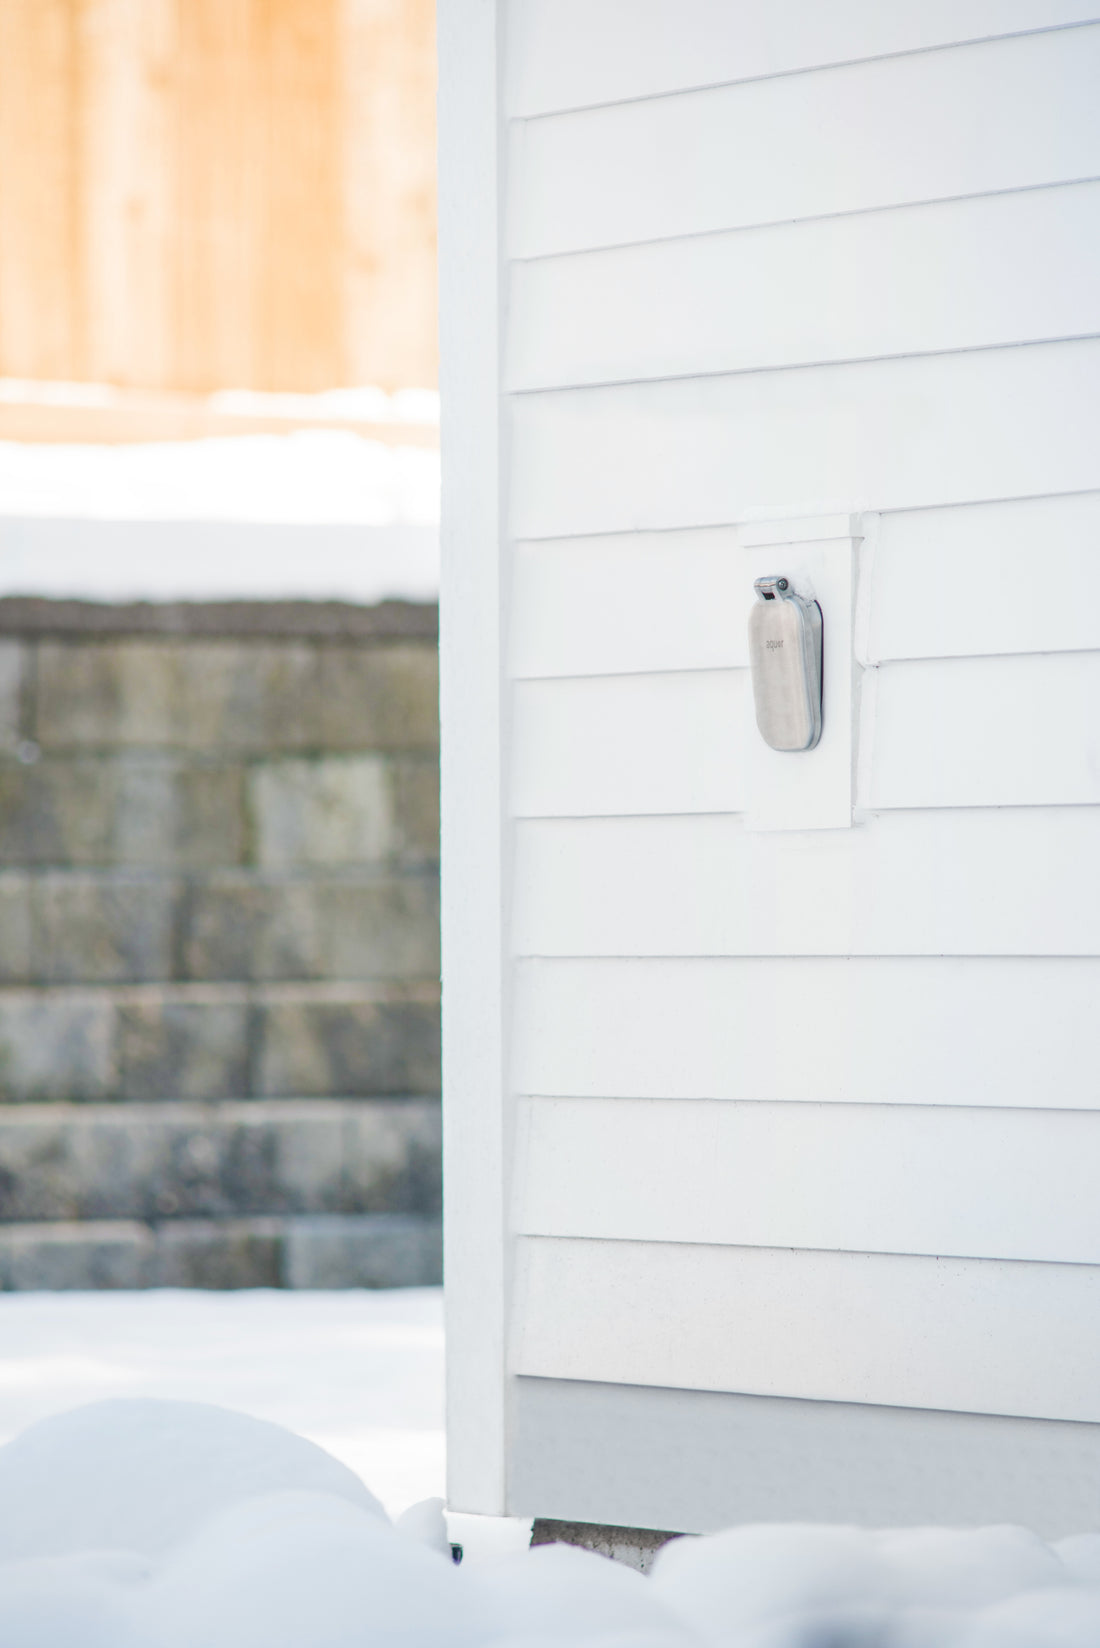 How to Protect Your Outdoor Faucet From Freezing